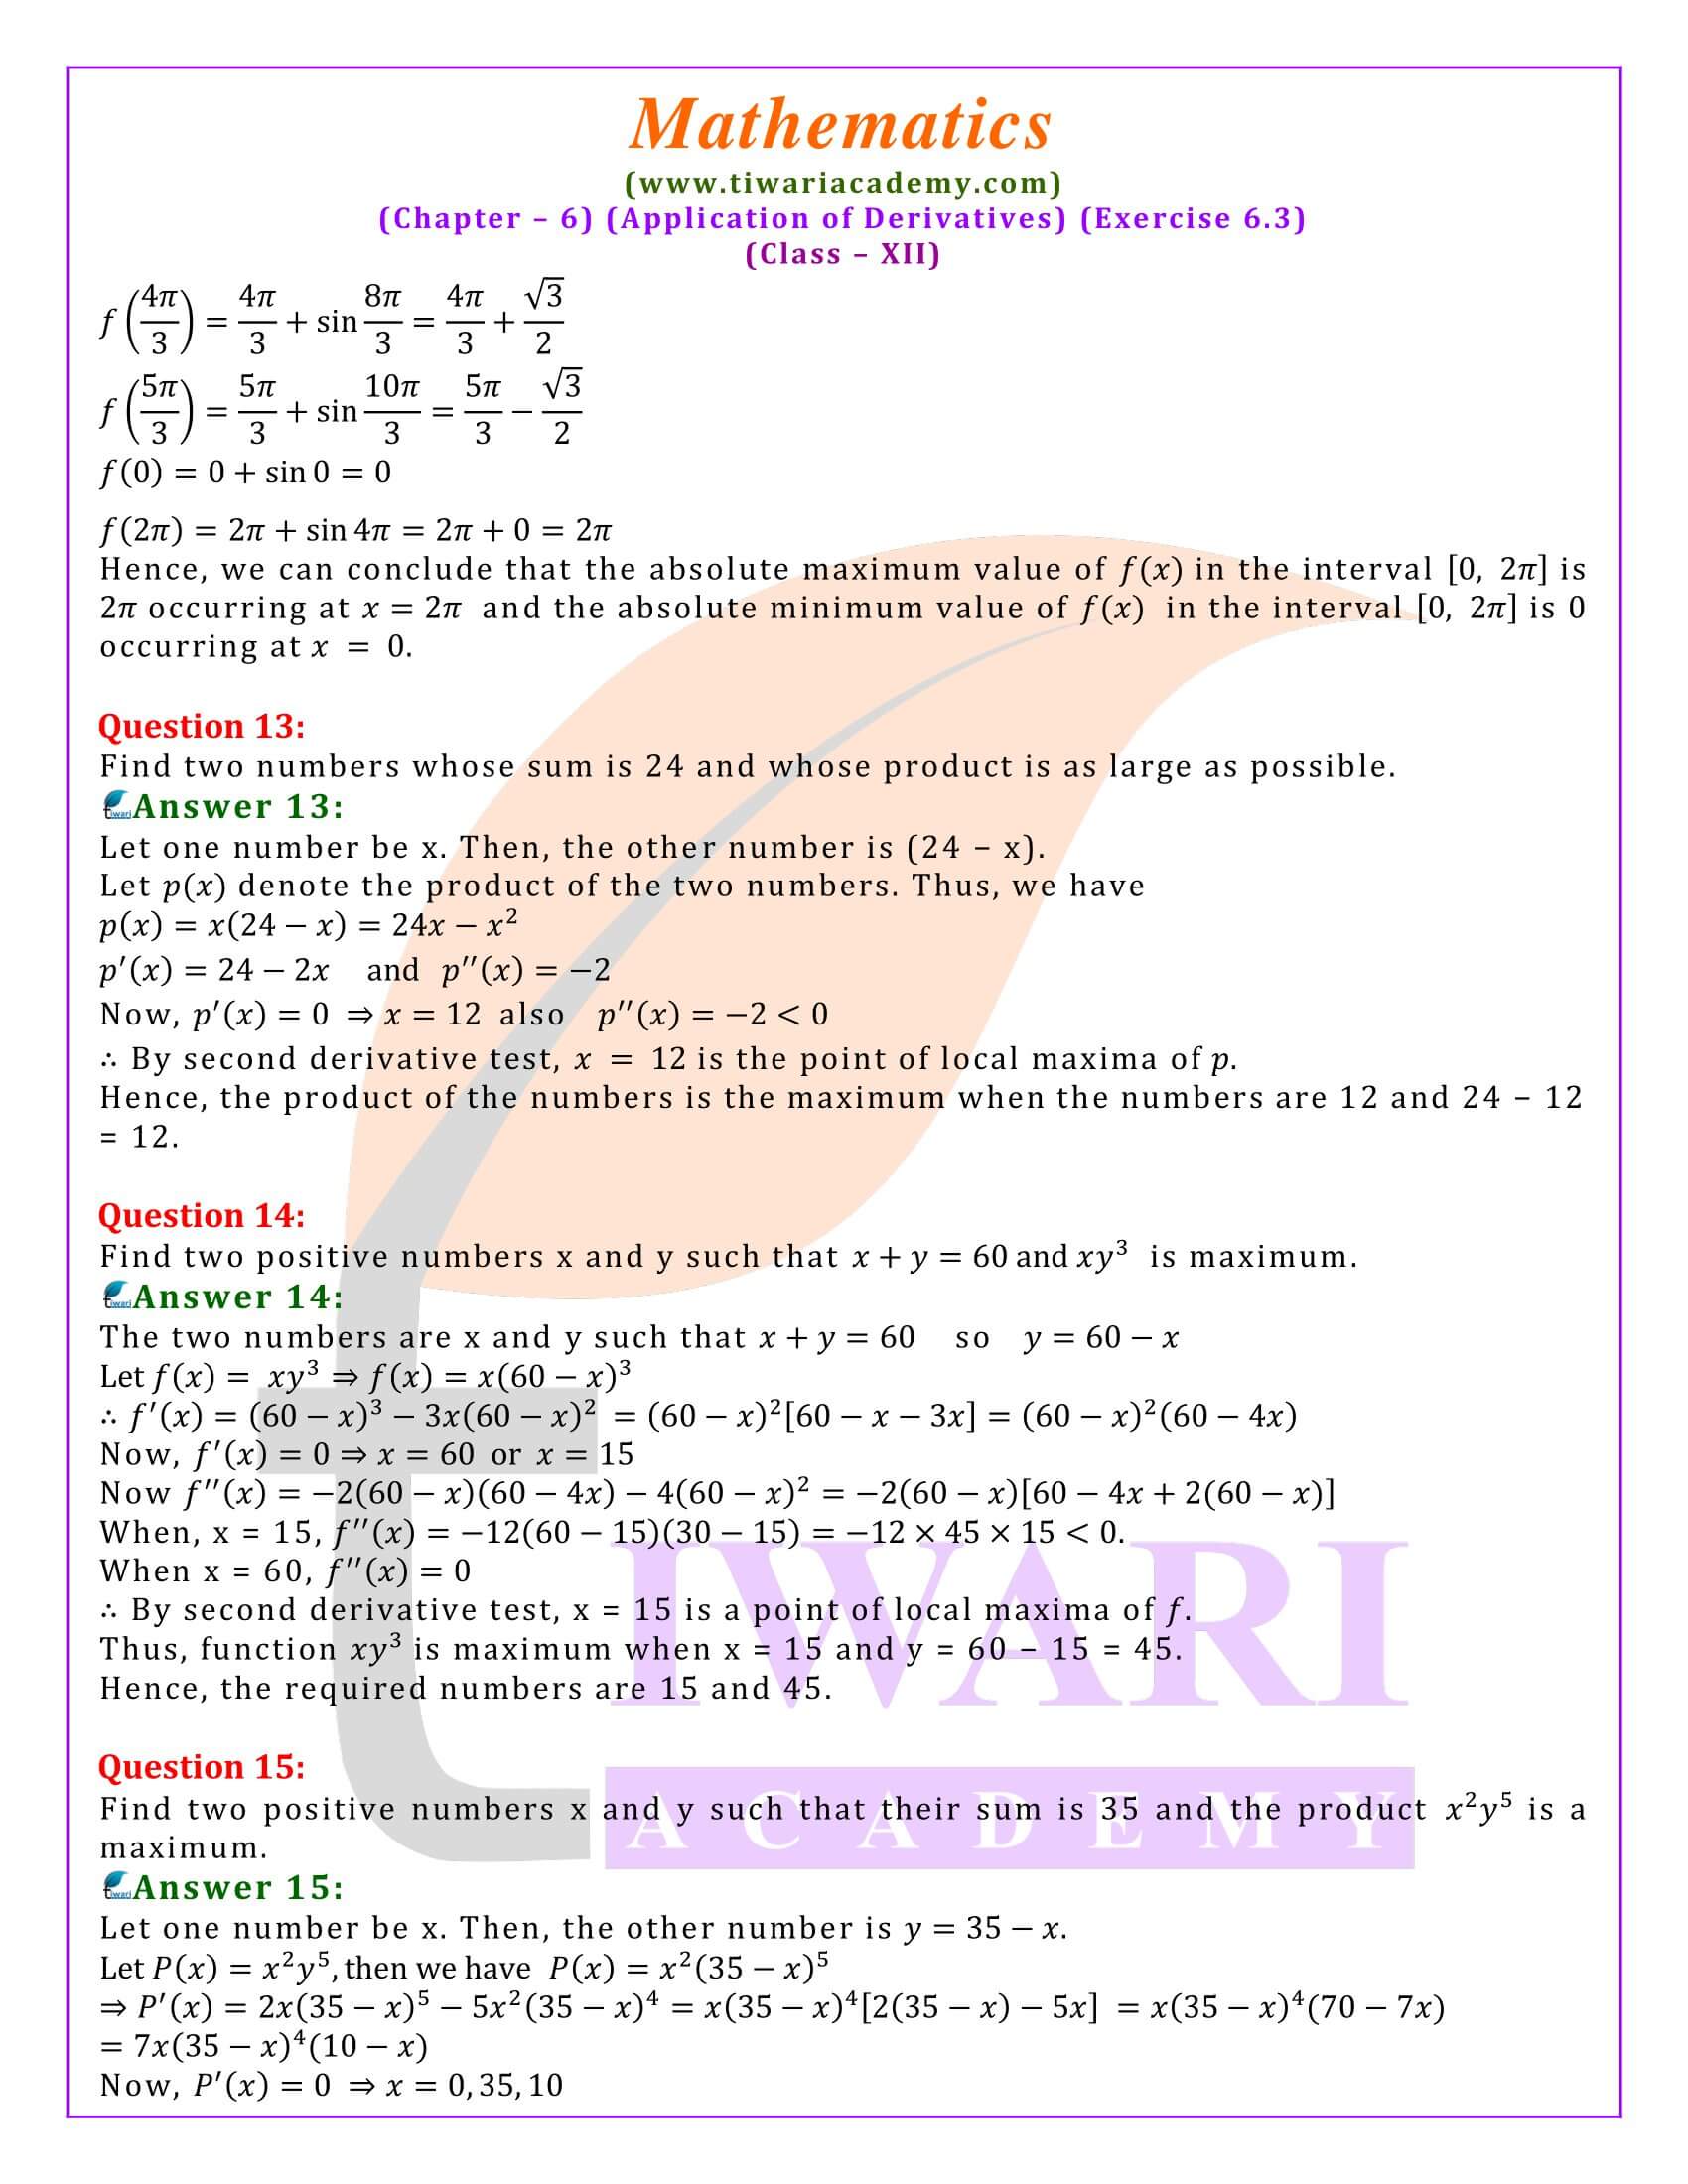 12th Maths ex. 6.3 question answers